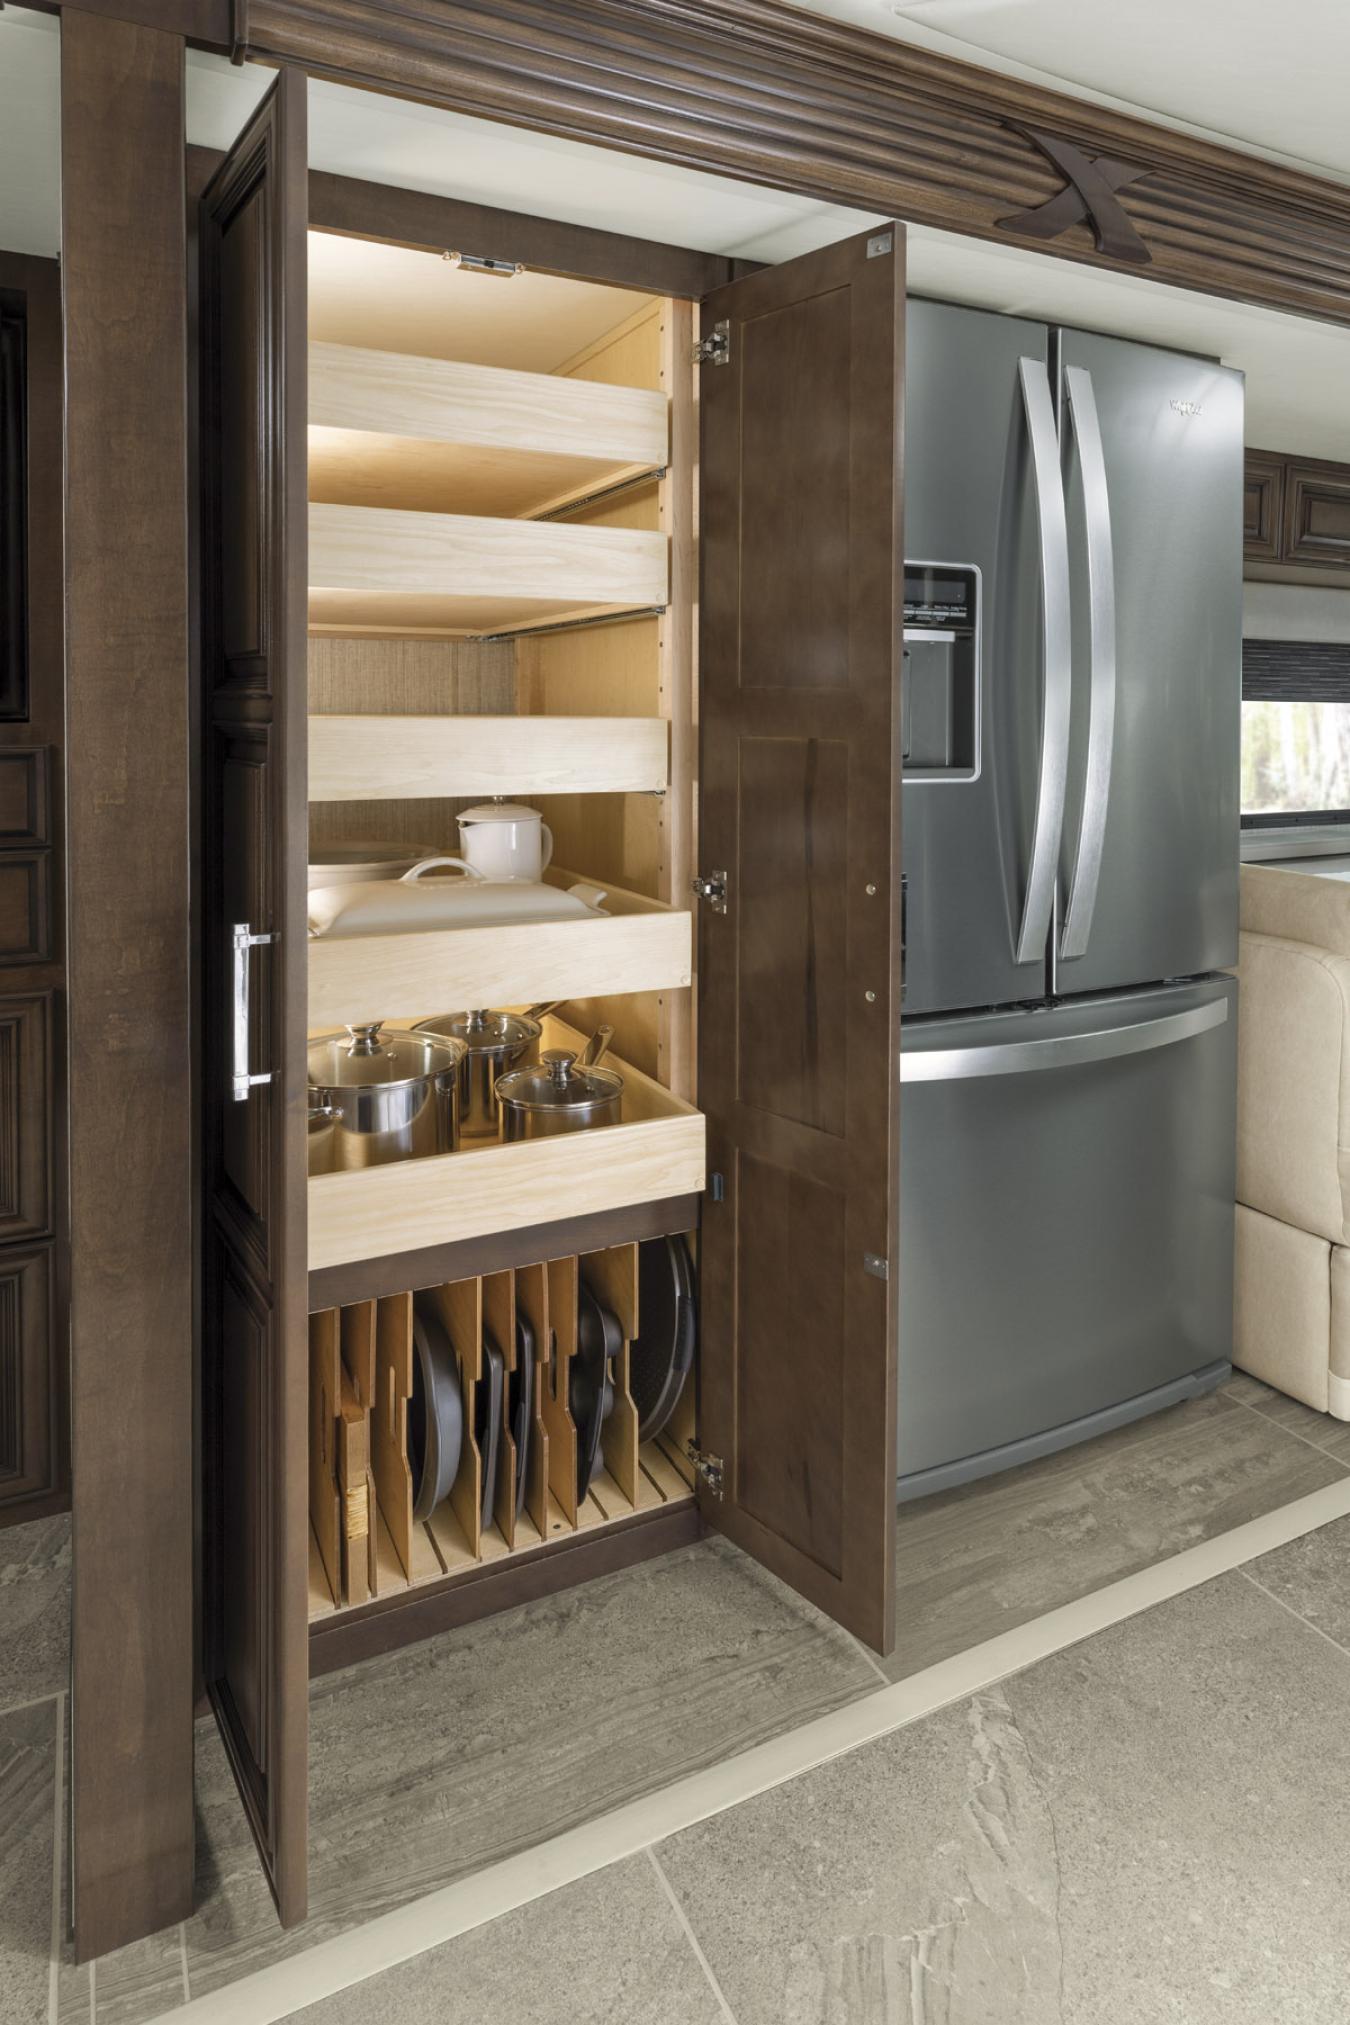 Kitchen pantry and refrigerator